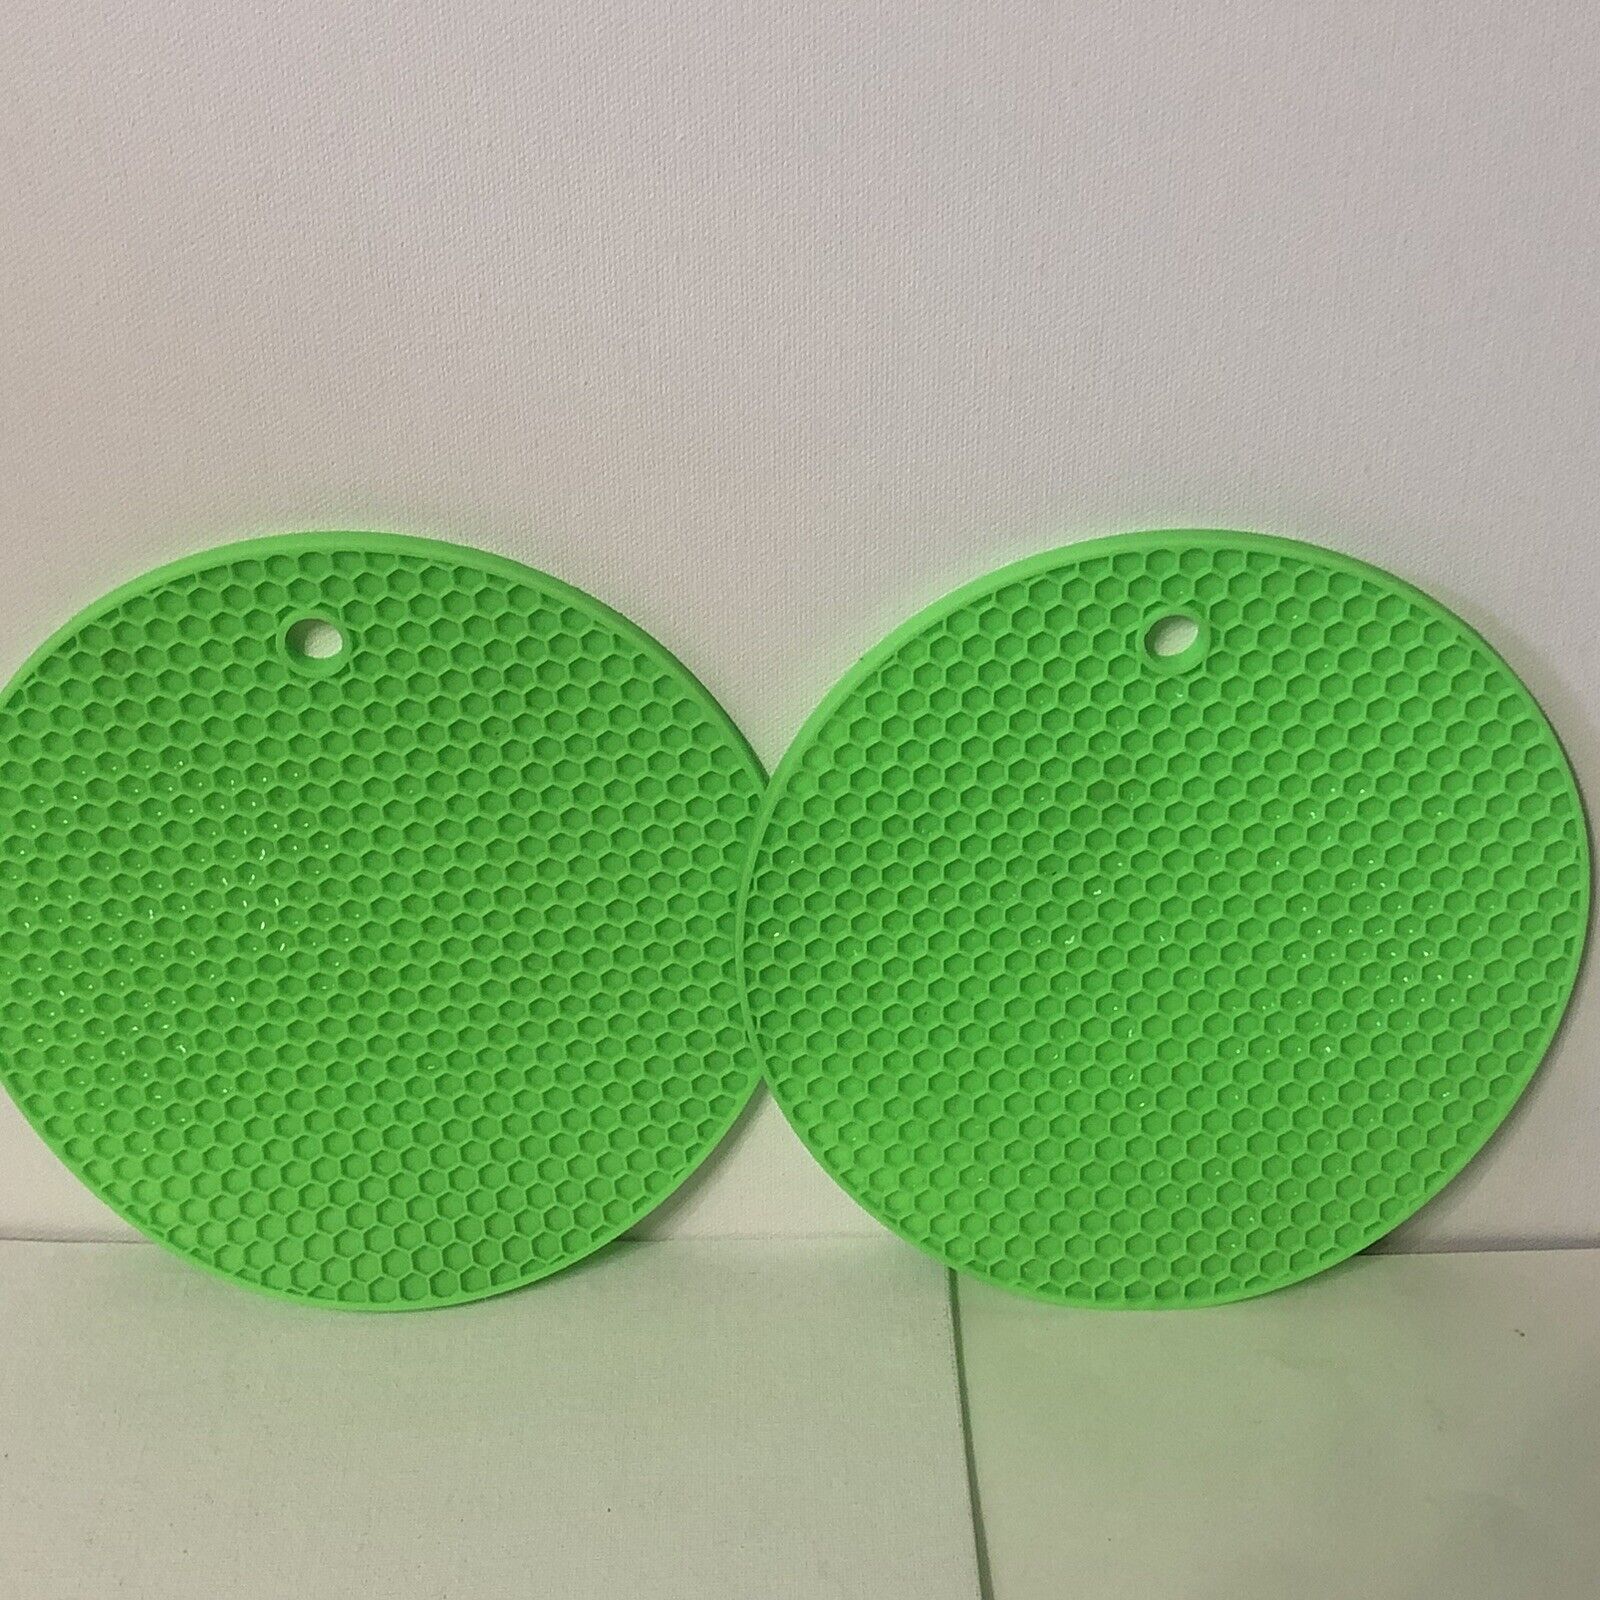 New Diamond Visions Set of Two Trivets Hot Pads Pot Holders Green Round 7 Inch